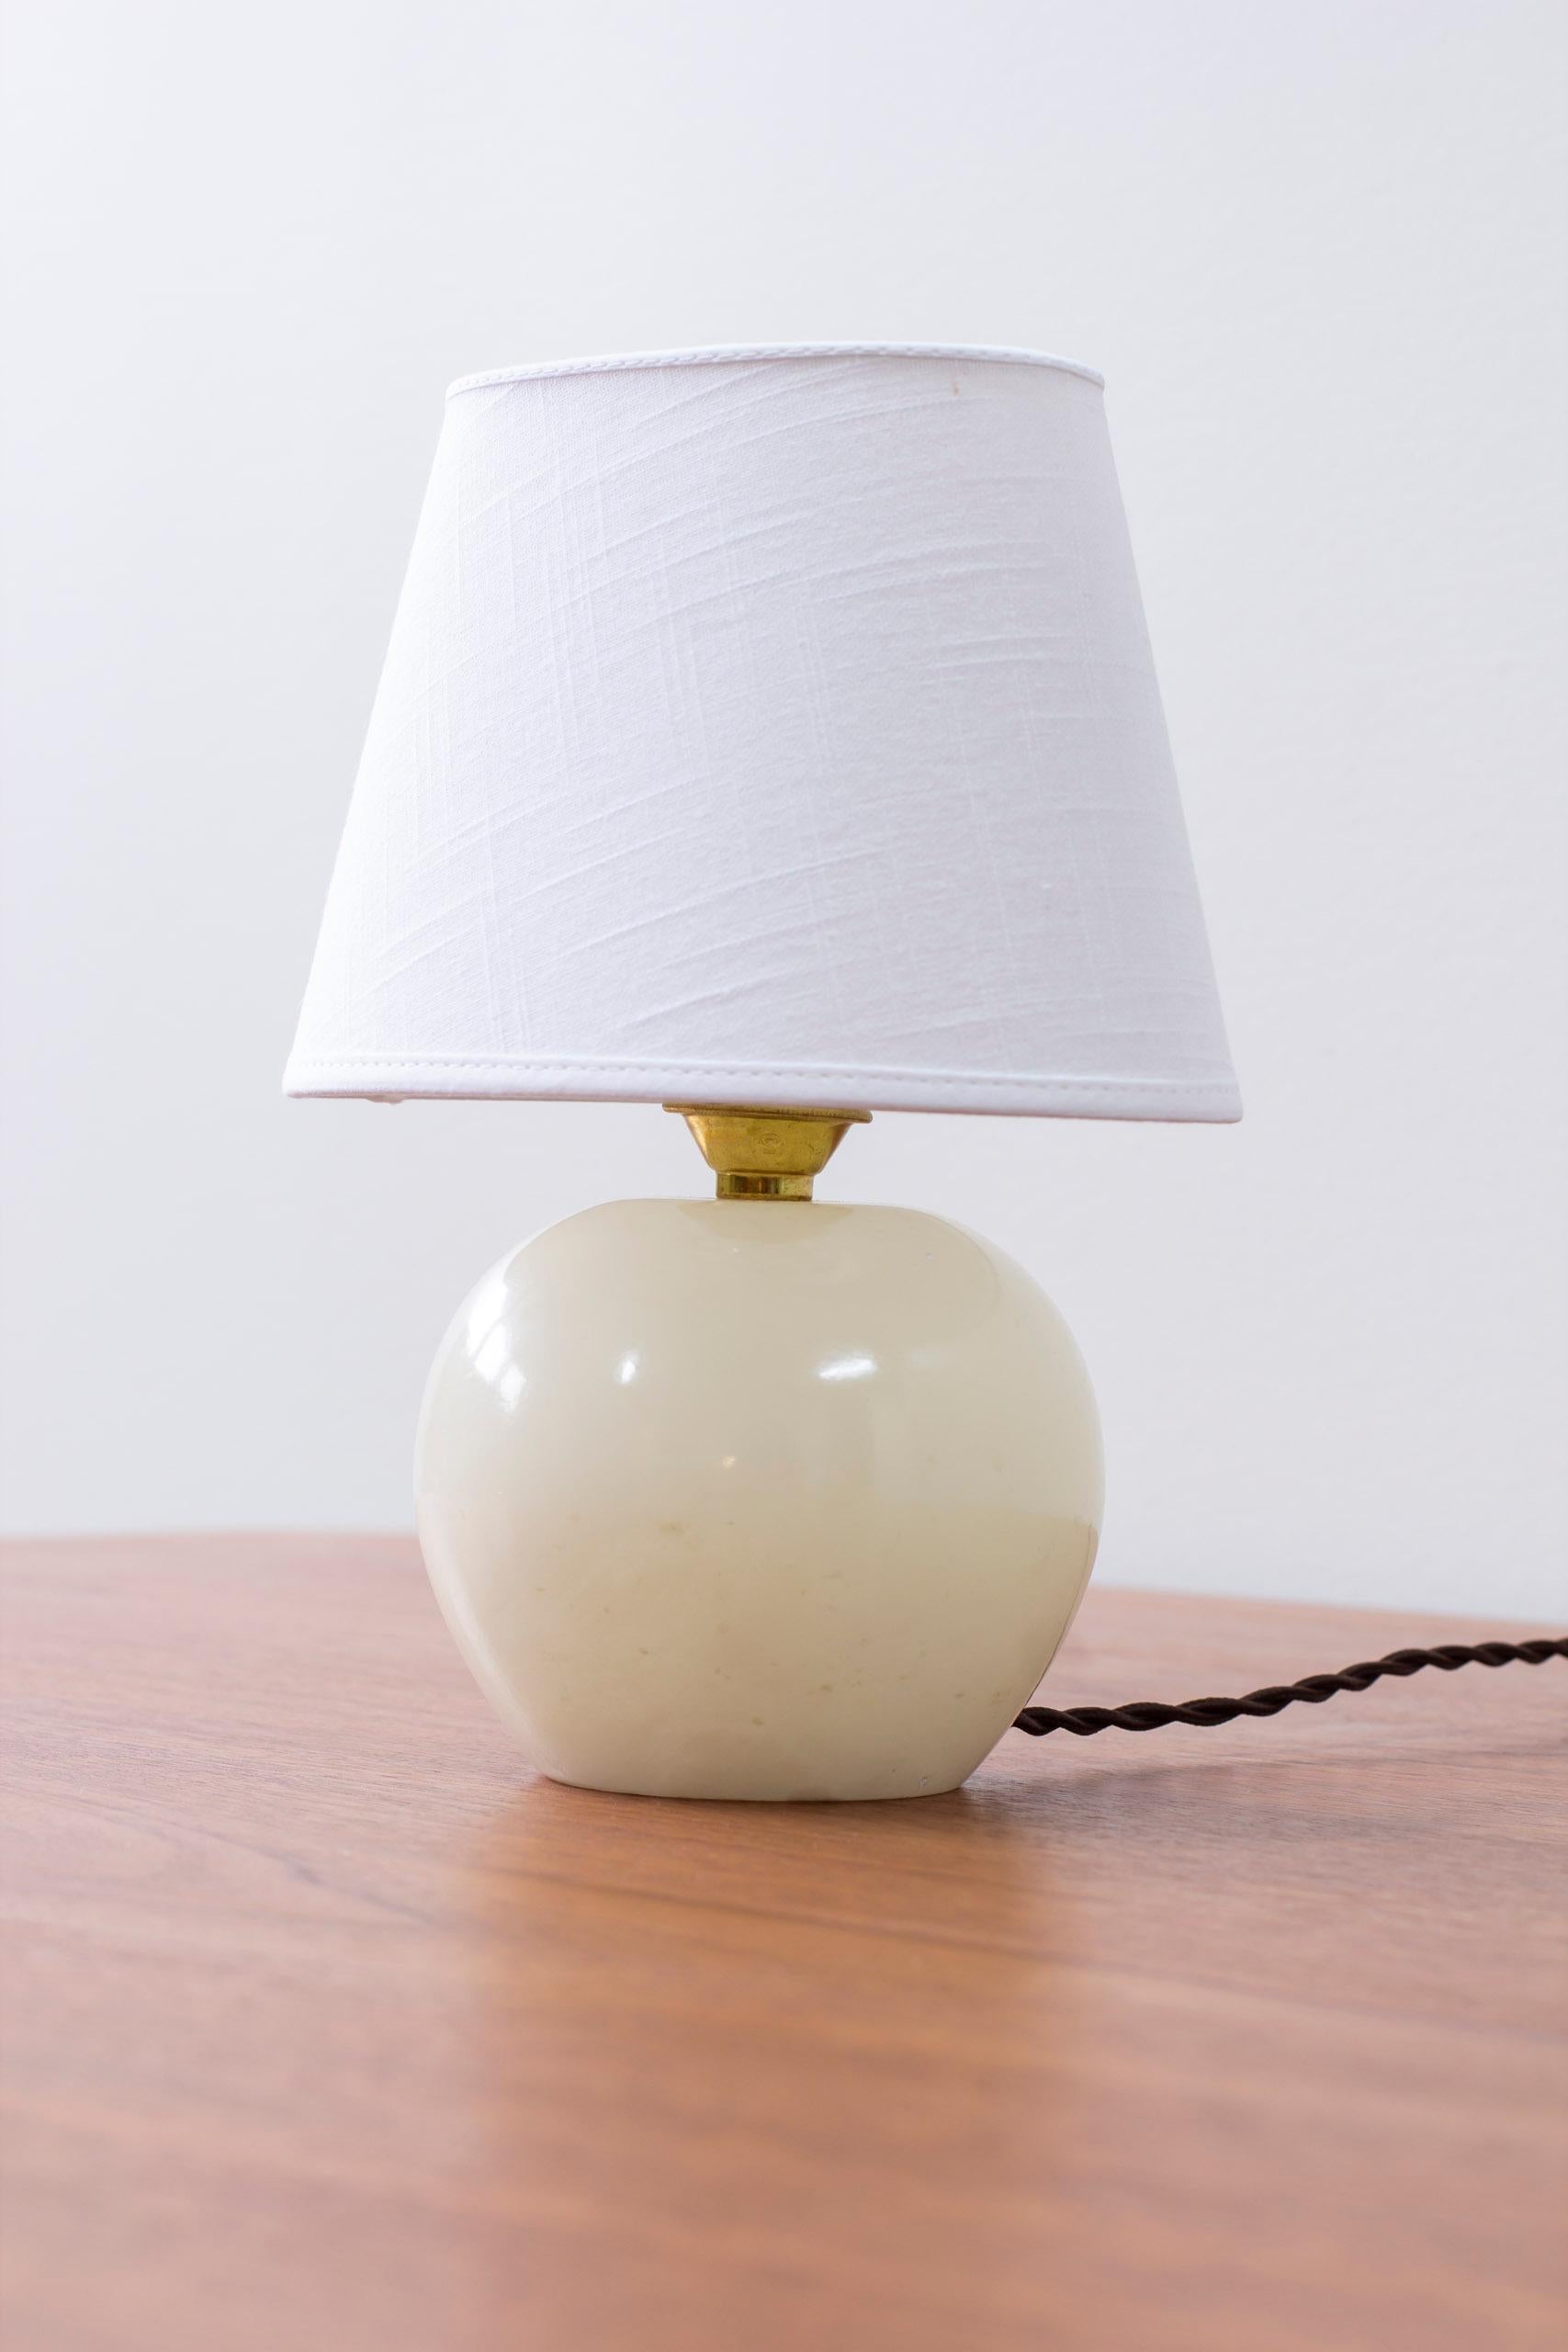 Table lamp model 2575 designed by Josef Frank. Produced by Svenskt Tenn and this piece ca 1950-60s. The lamp is commonly made from wood but this example made from carrara marble stone. New lamp shade in cotton. Very good vintage condition with light